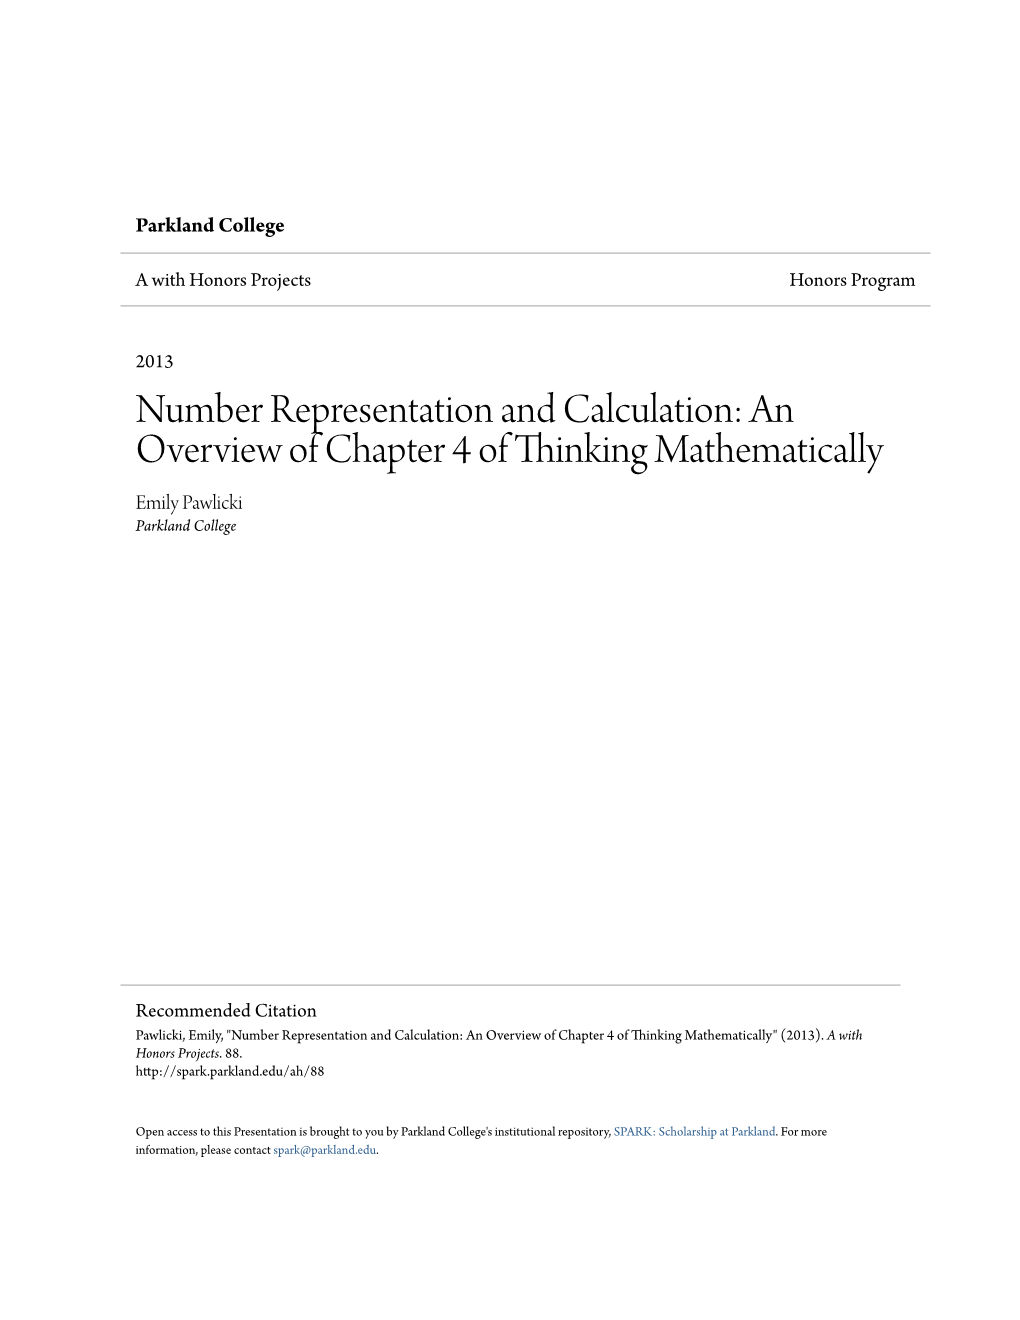 Number Representation and Calculation: an Overview of Chapter 4 of Thinking Mathematically Emily Pawlicki Parkland College